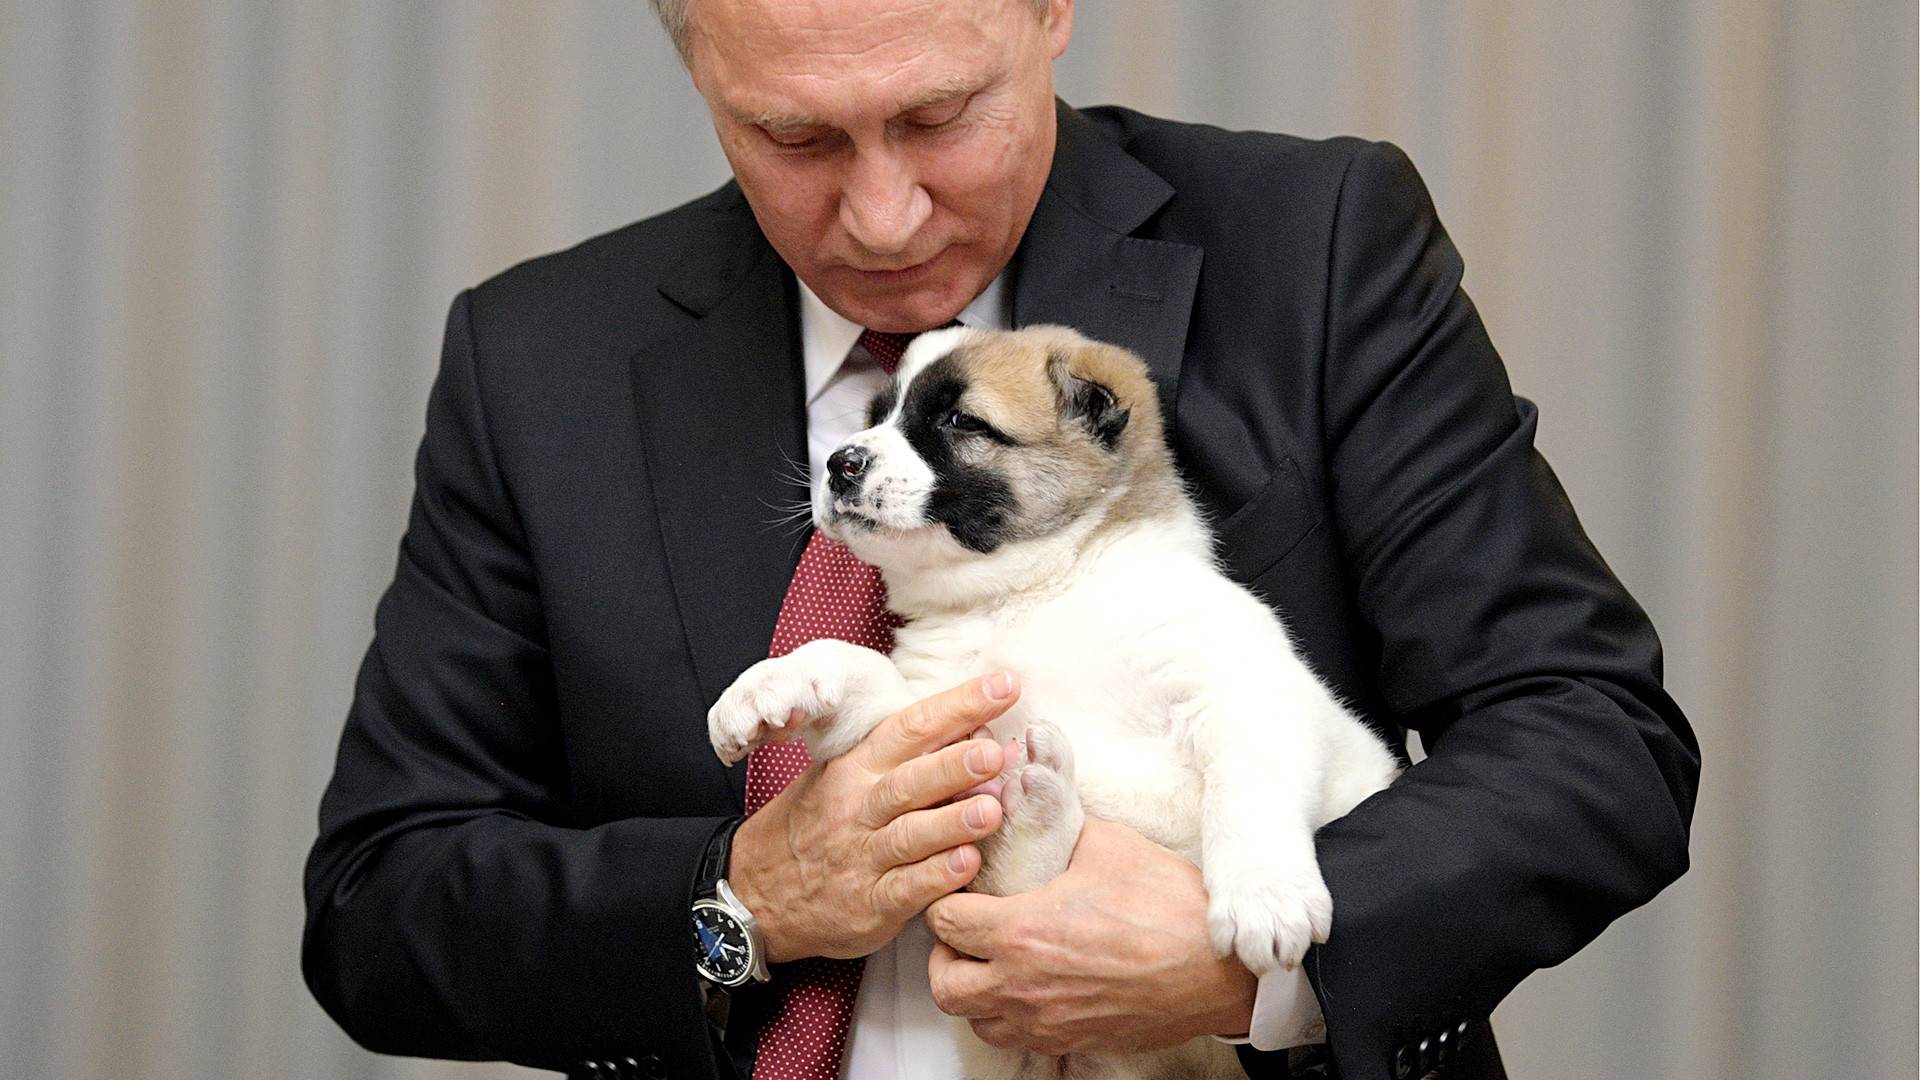 Russia's President Vladimir Putin holds the puppy given to him by Turkmenistan's President Gurbanguly Berdimuhamedow for his birthday.